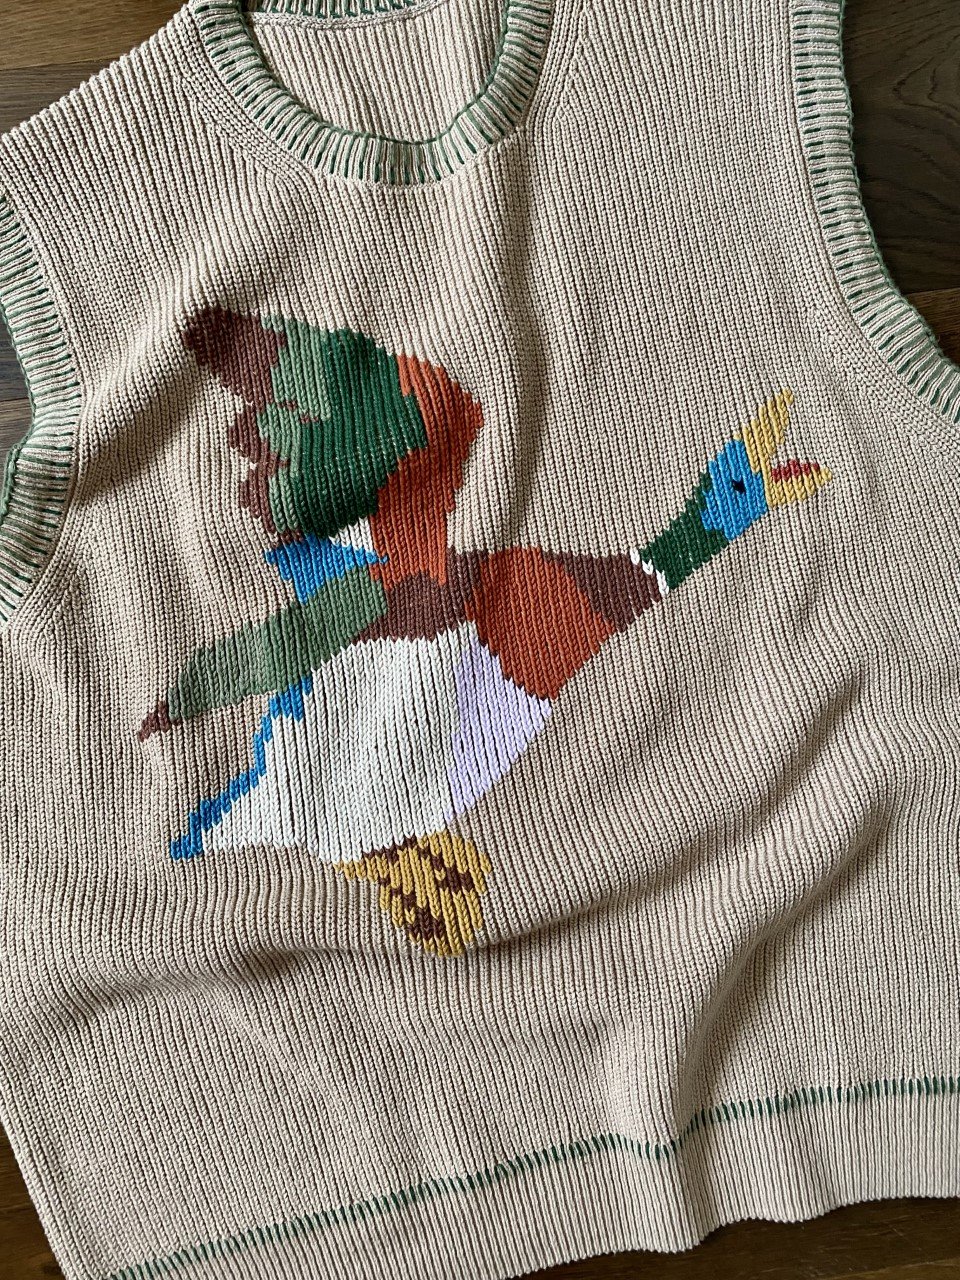  Embroidered knit vest for my love  